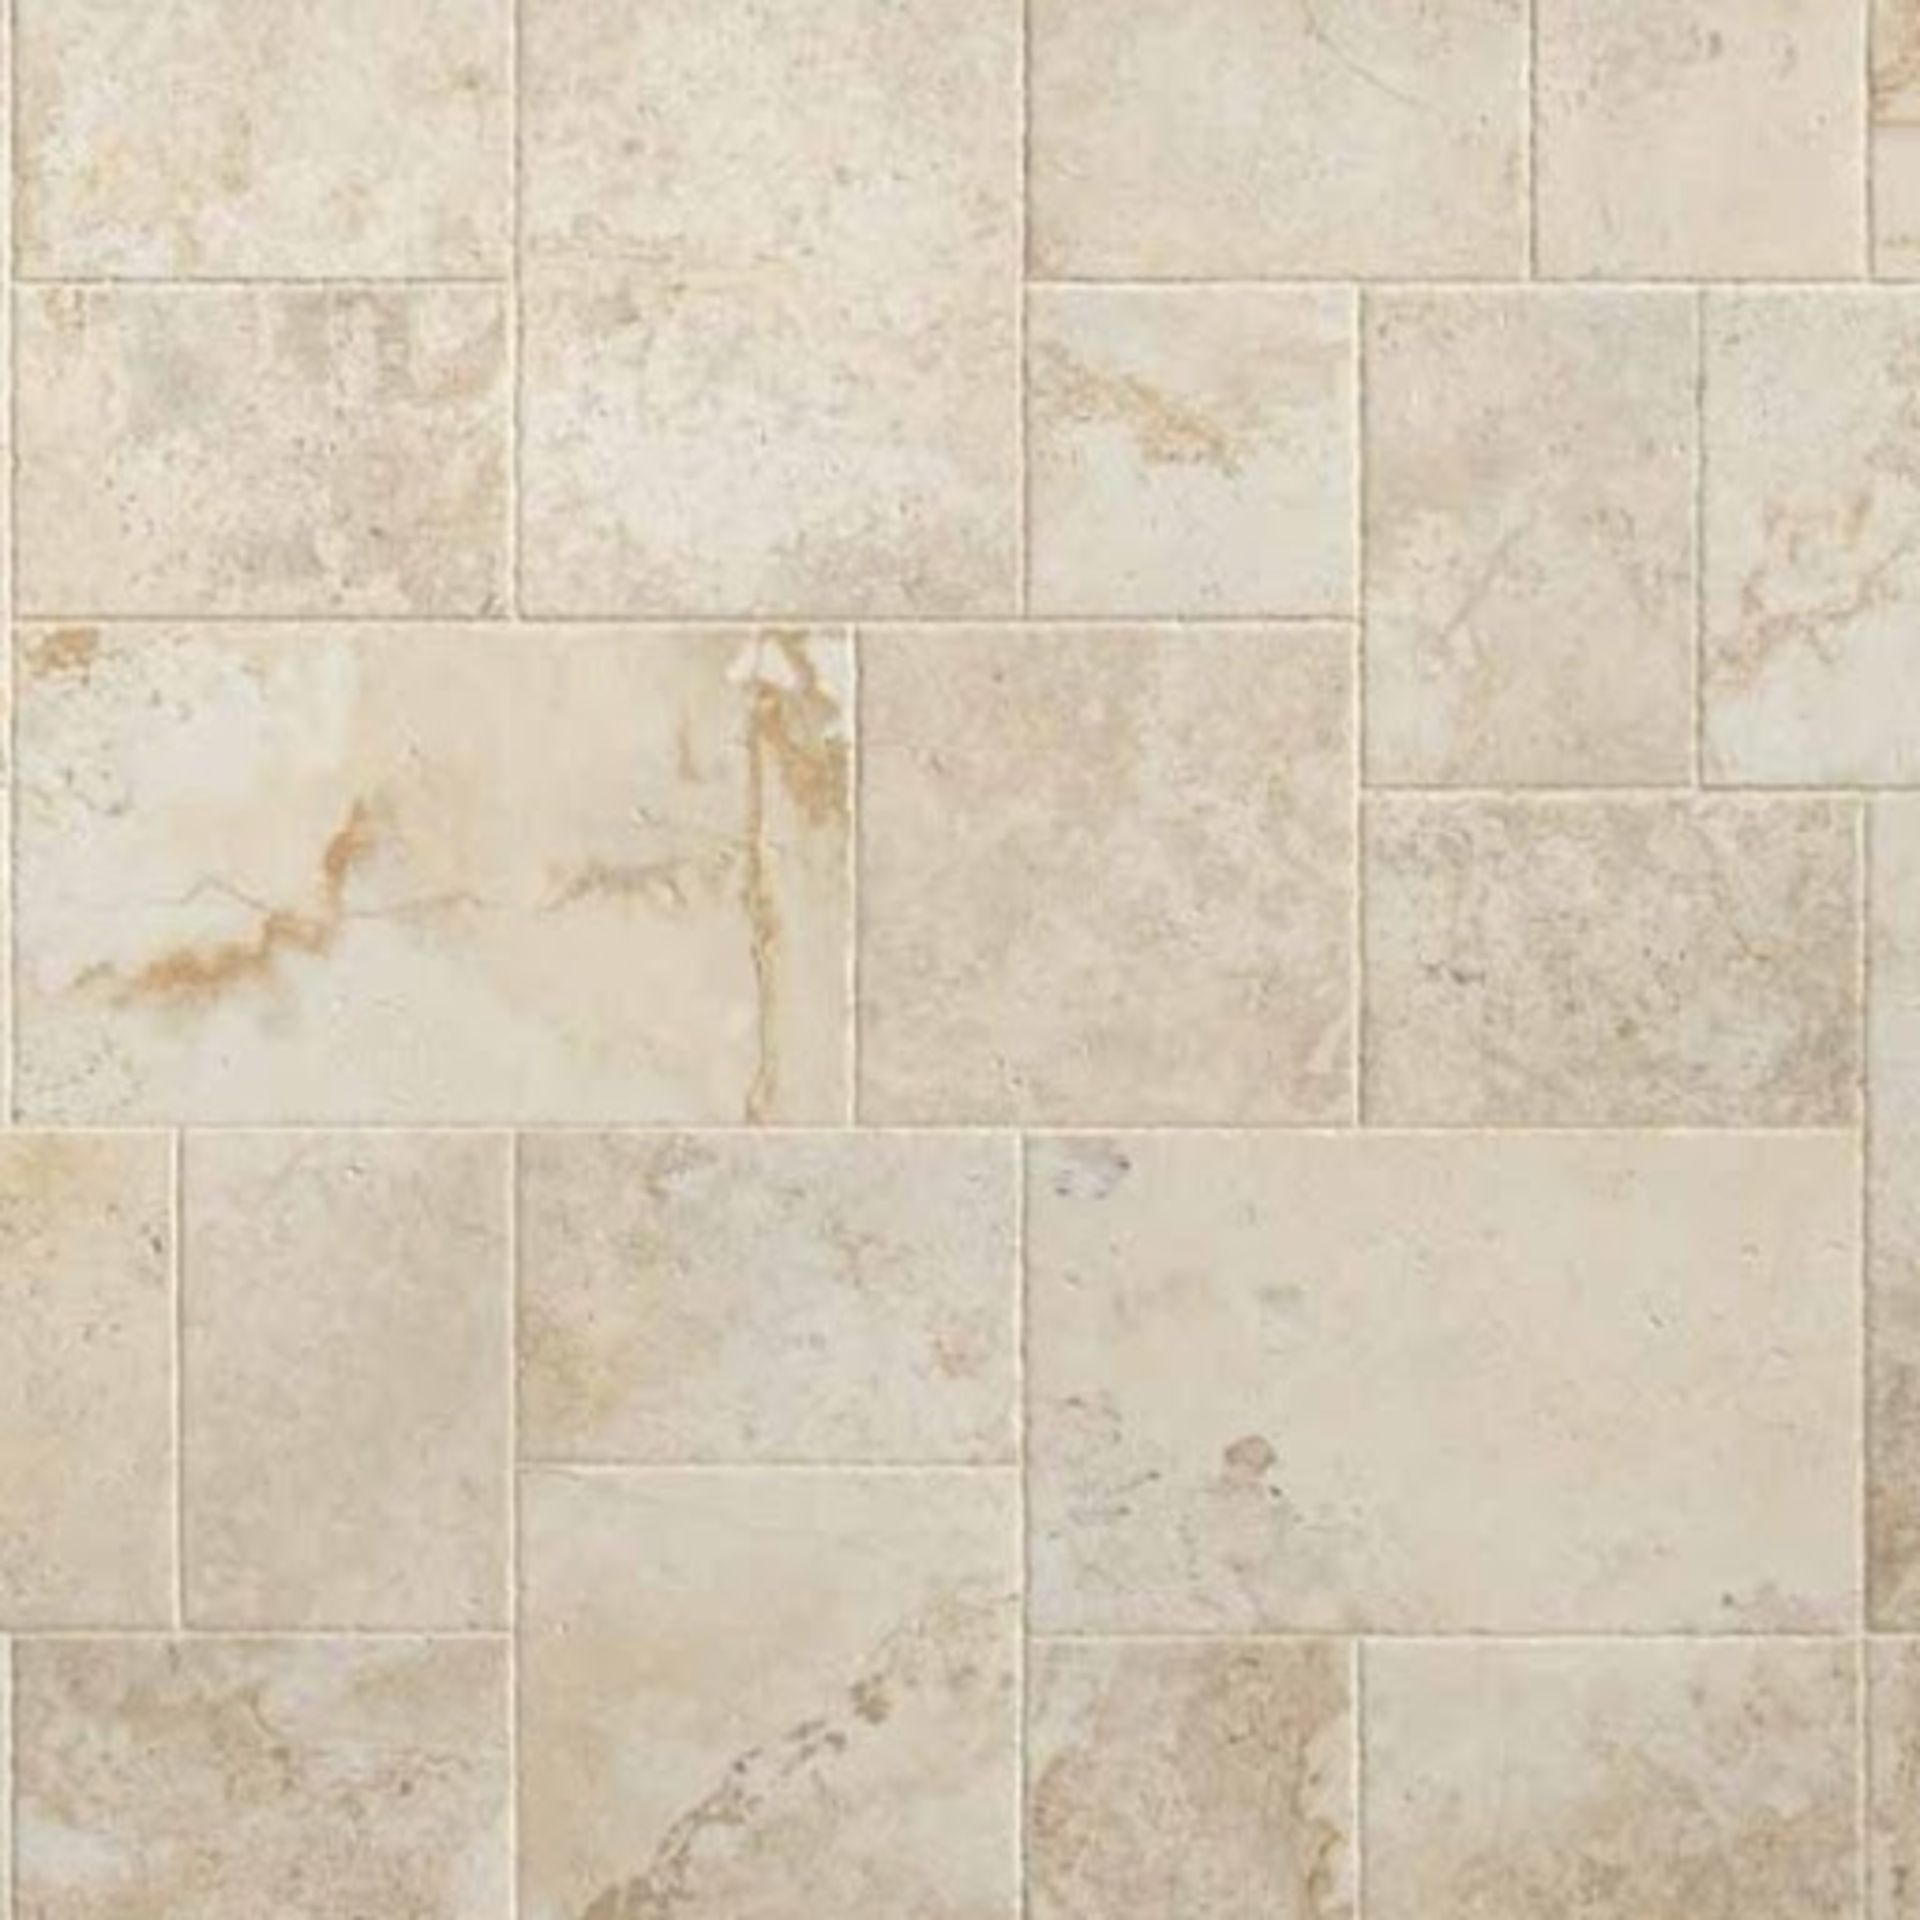 8.76m2 Imola Beige Wall and Floor Tiles. 605x605mm per tile, 10mm thick. This tile has a shiny - Image 2 of 3